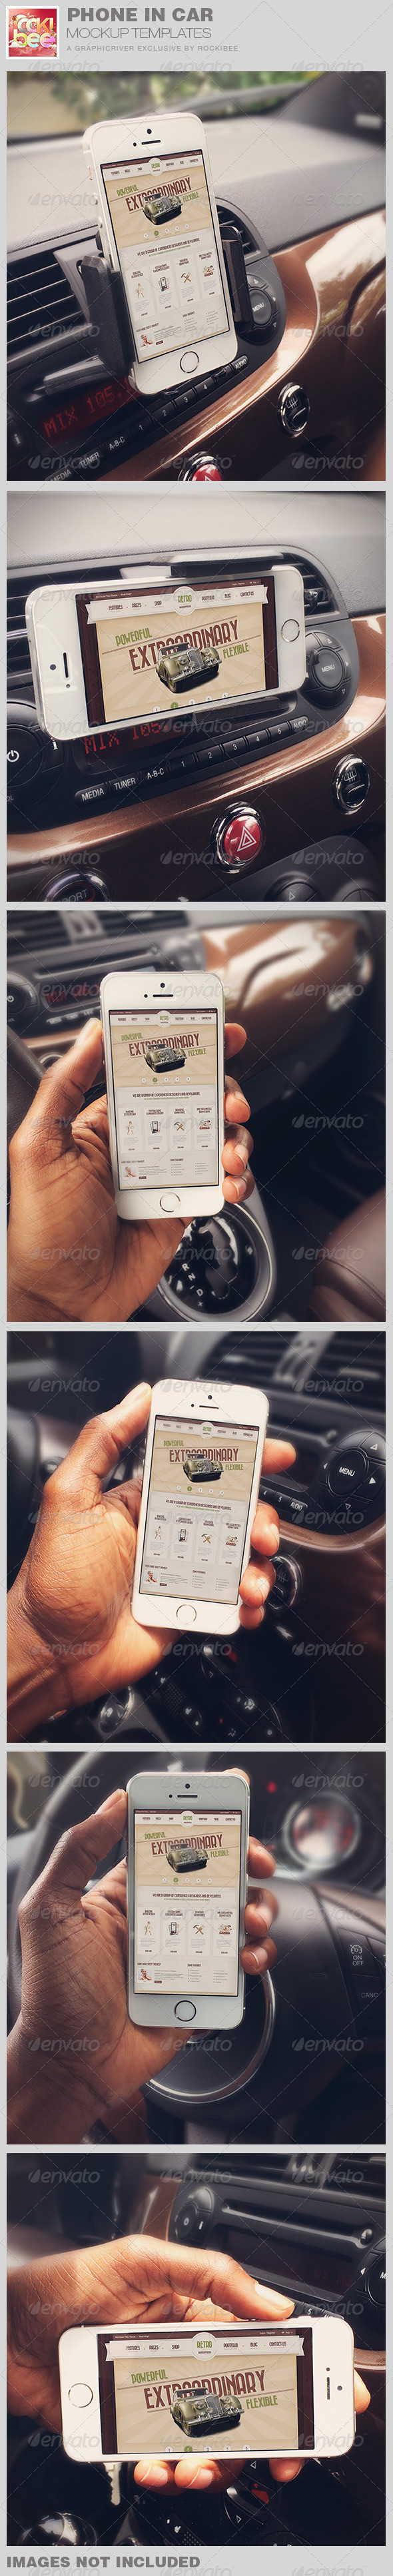 Smart phone in car mockup template image preview